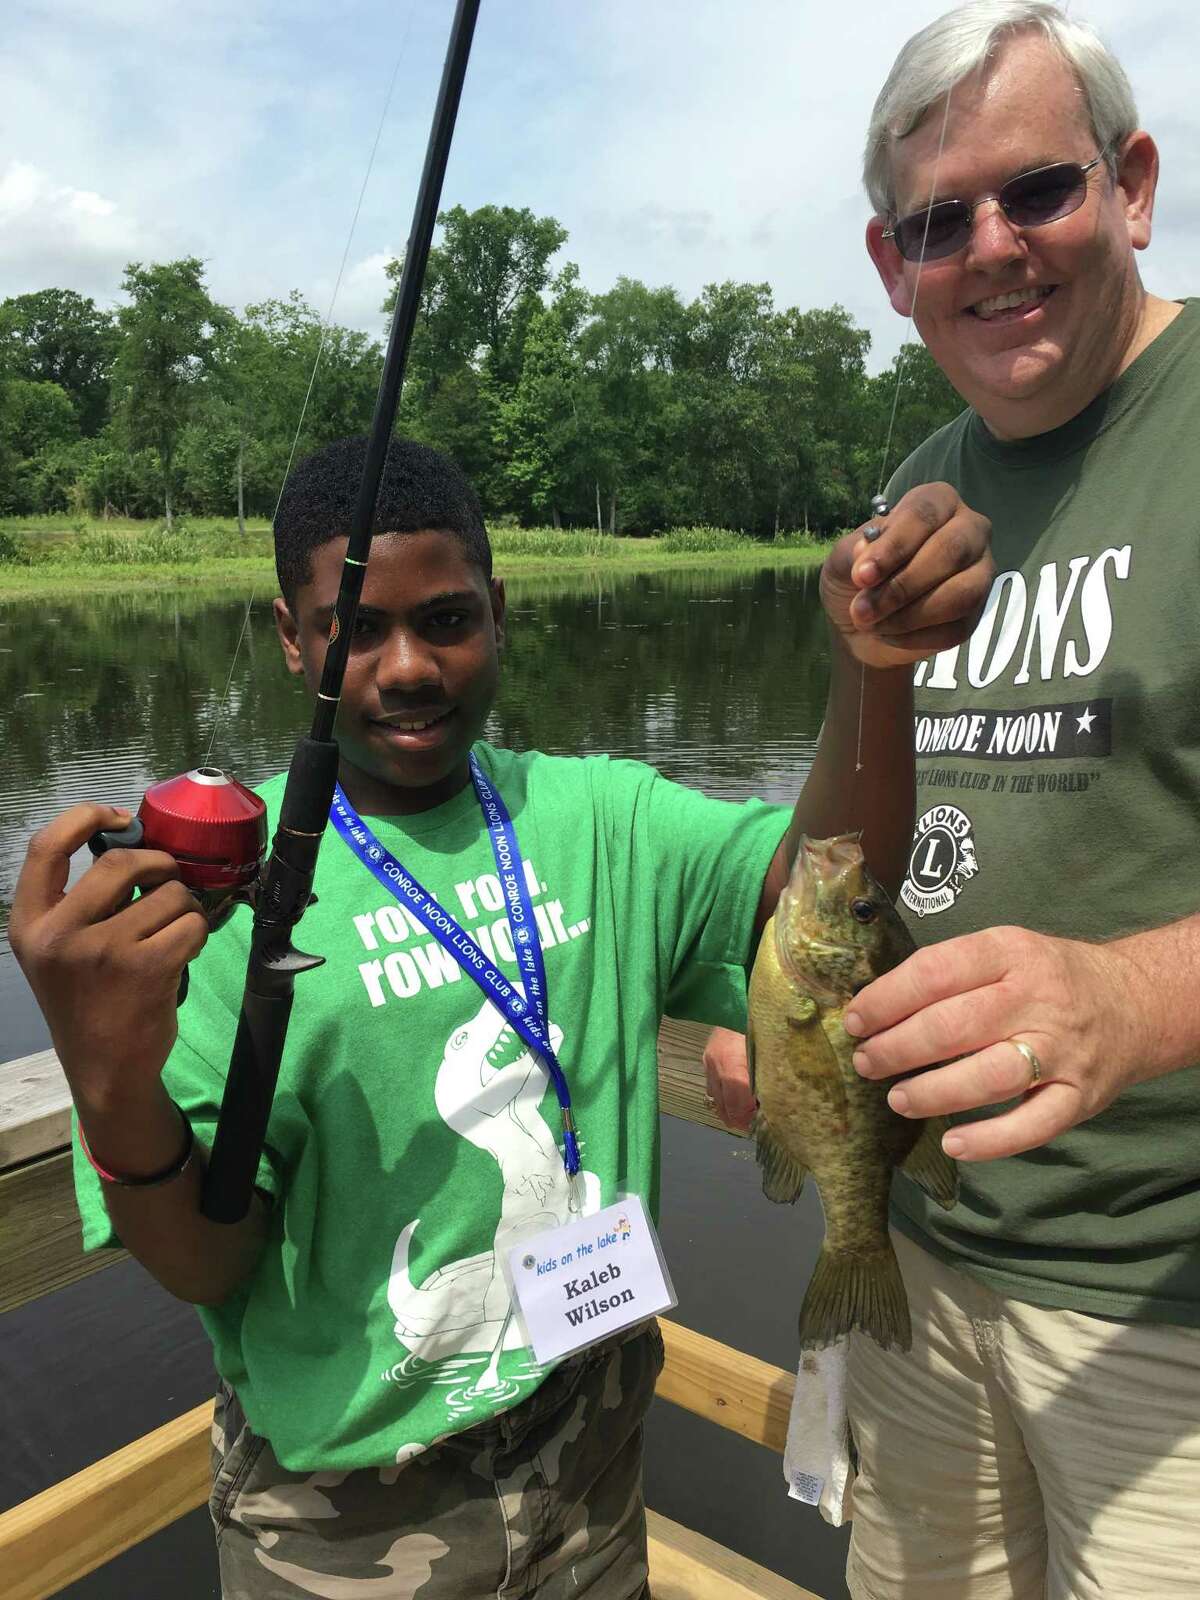 Conroe Noon Lions Club will host its annual 'kids on the lake' – fishing tournament for special needs children on Saturday, May 13th at the Conroe YMCA's Camp Owen – registrations due by May 10th. Pictured from left are Kaleb Wilson and Lion George Waggoner.